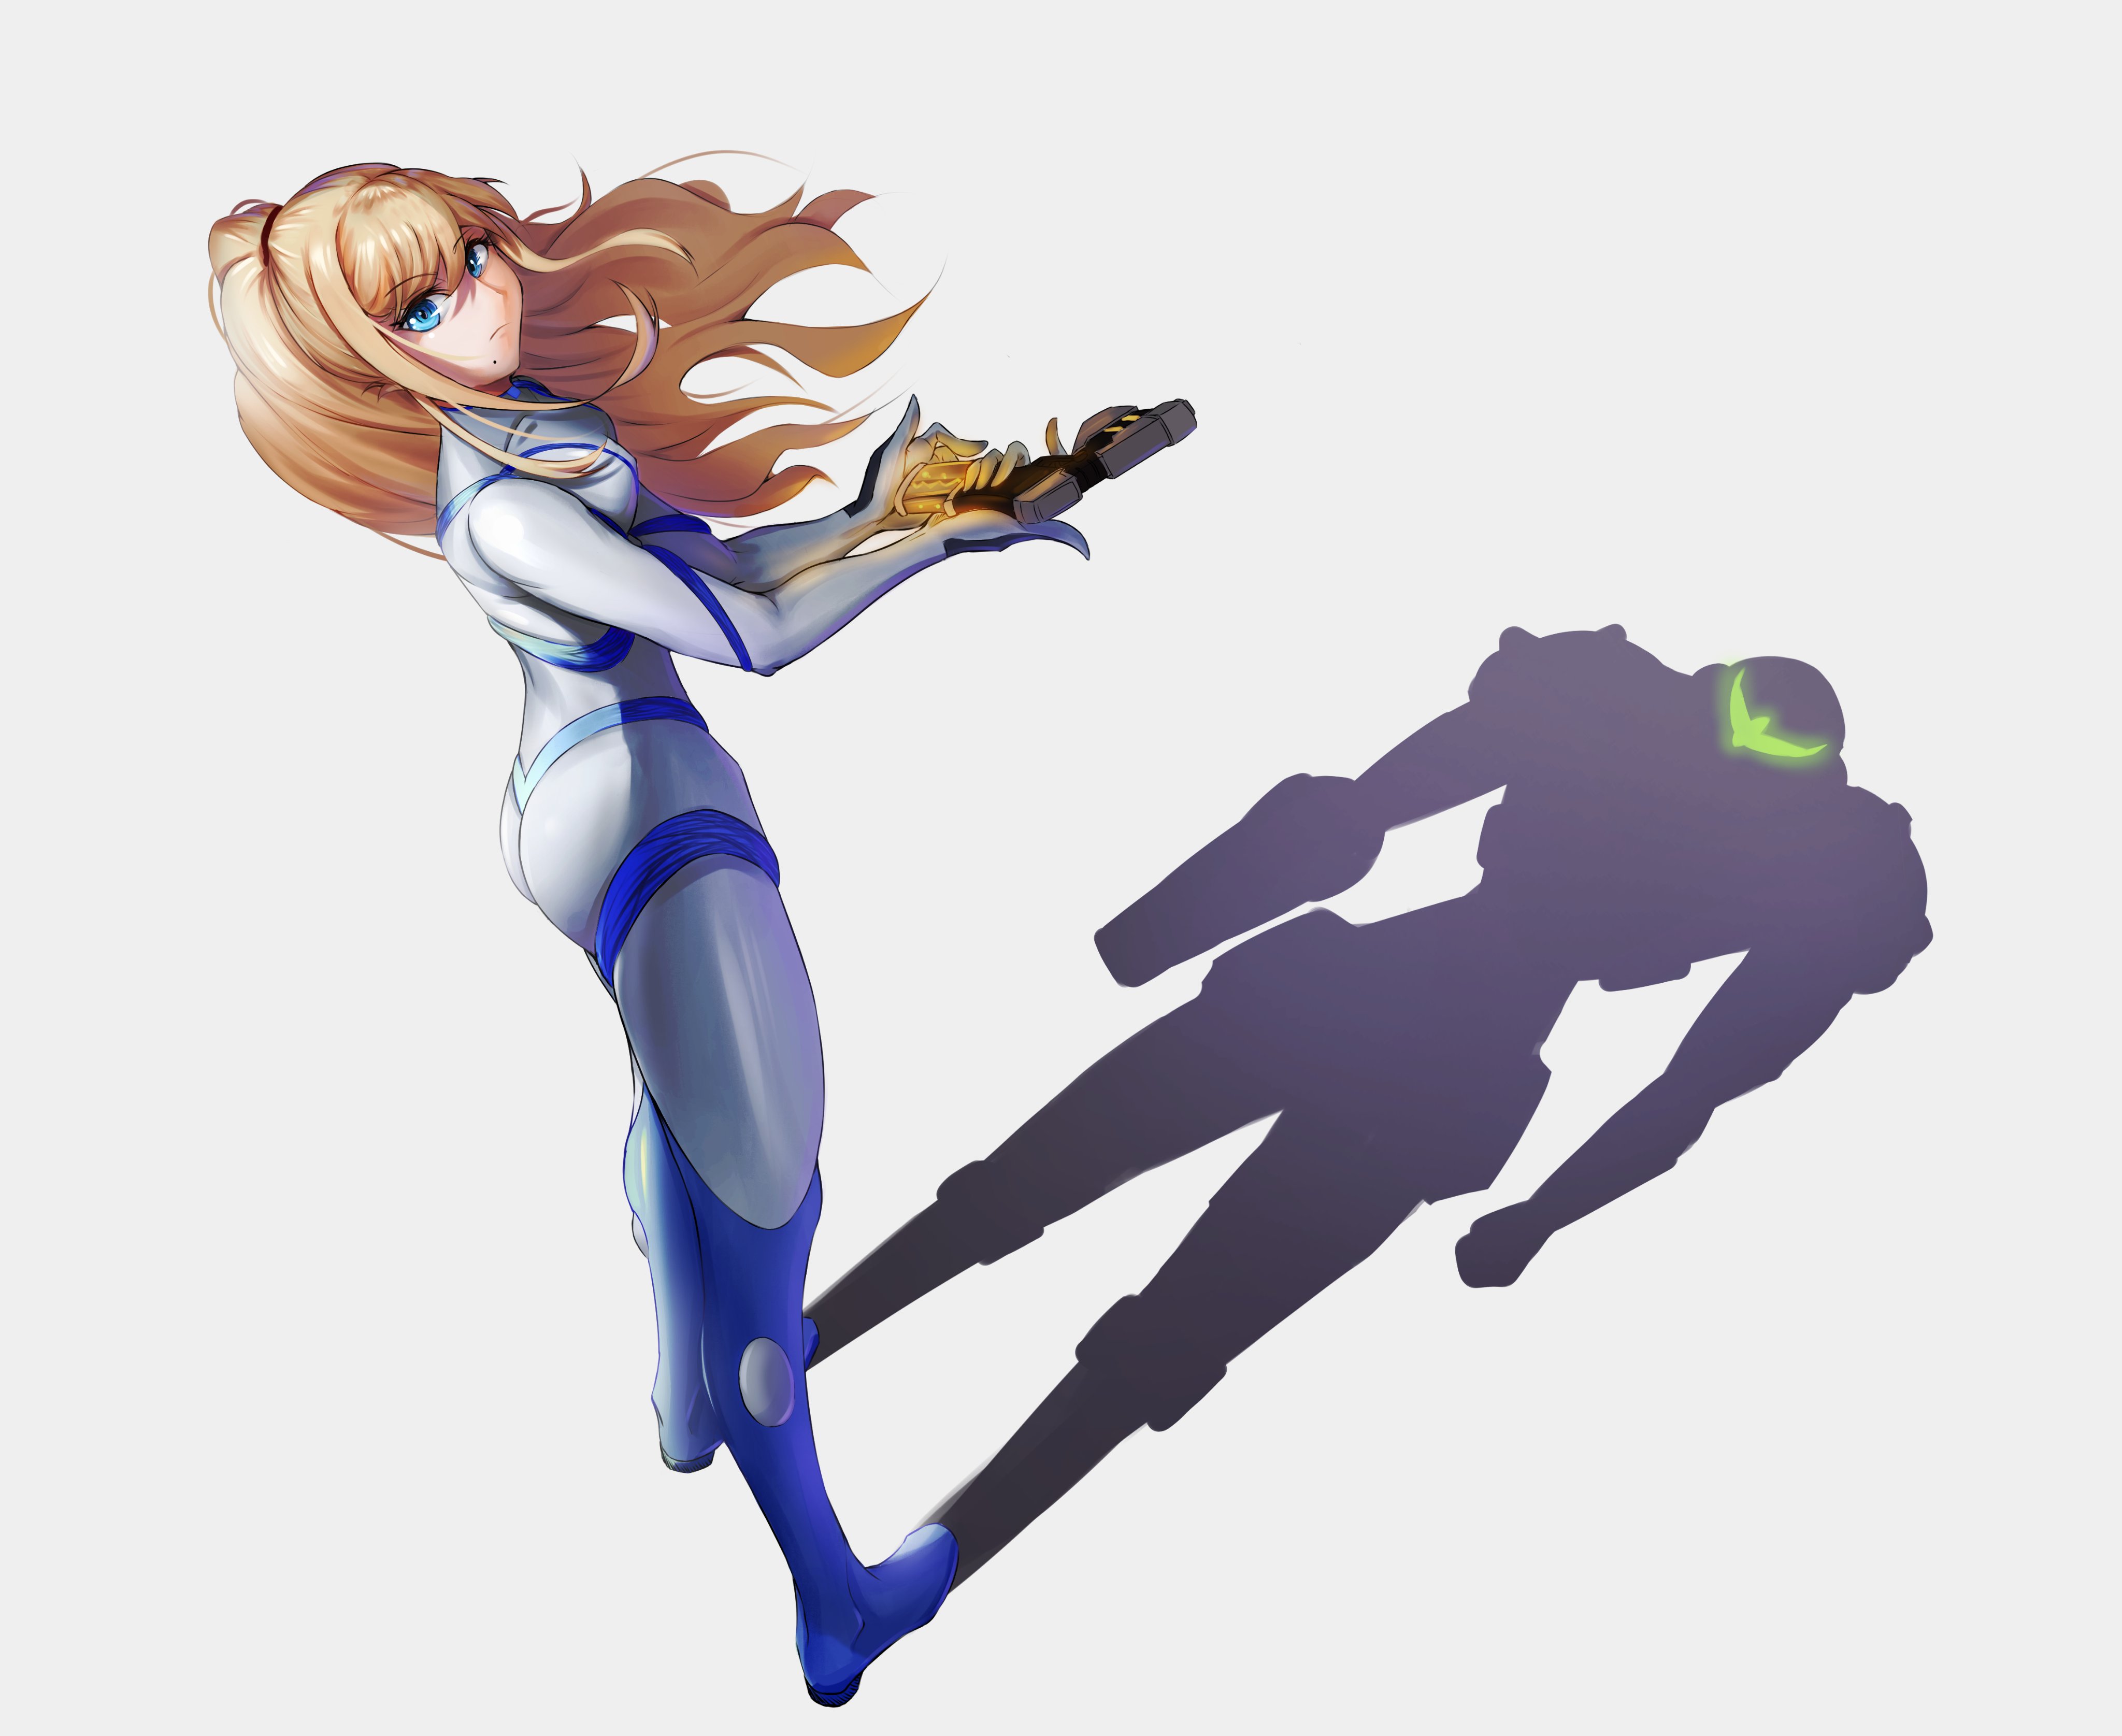 __samus_aran_metroid_and_1_more_drawn_by_luxpineapple__3a035f42f0cfd42d013e9073a601f848.jpg